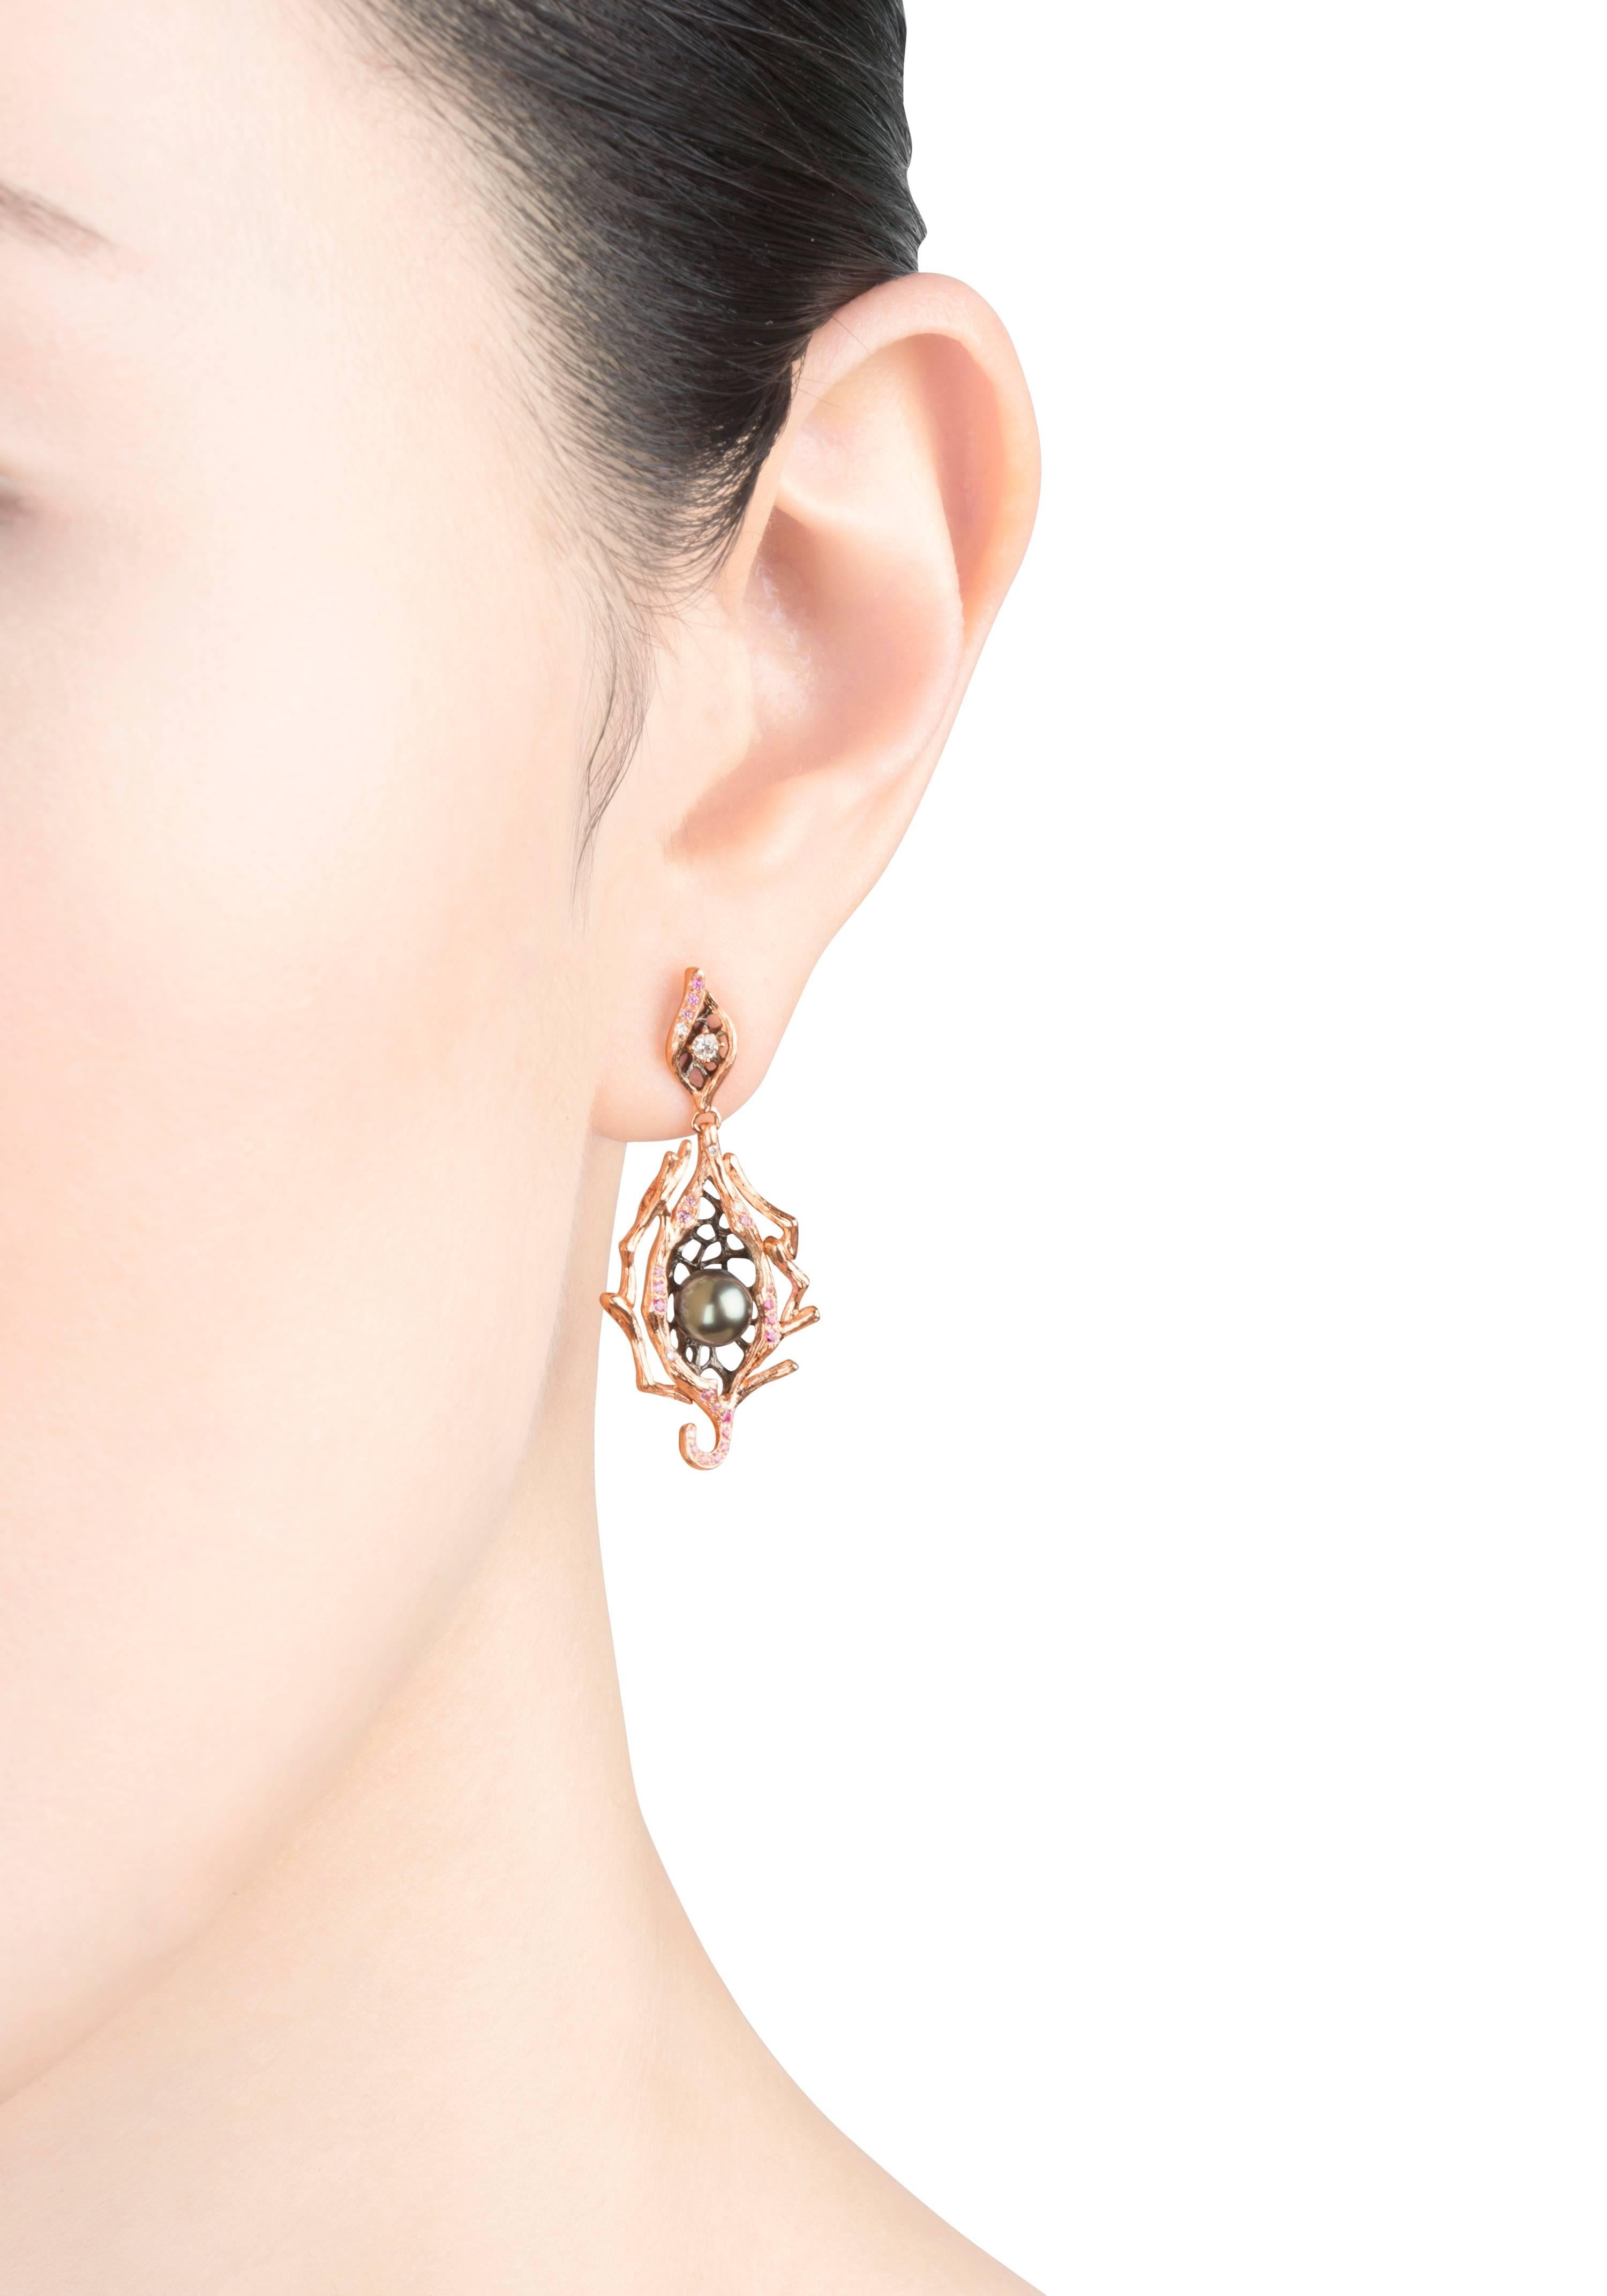 Nestled within these asymmetrical 18K rose gold earrings are two delicate and rare keshi pearls. Like secret treasures protected by a forest, they symbolise the beauty of golden berries. Adorned with pink sapphires and diamonds, these stunning